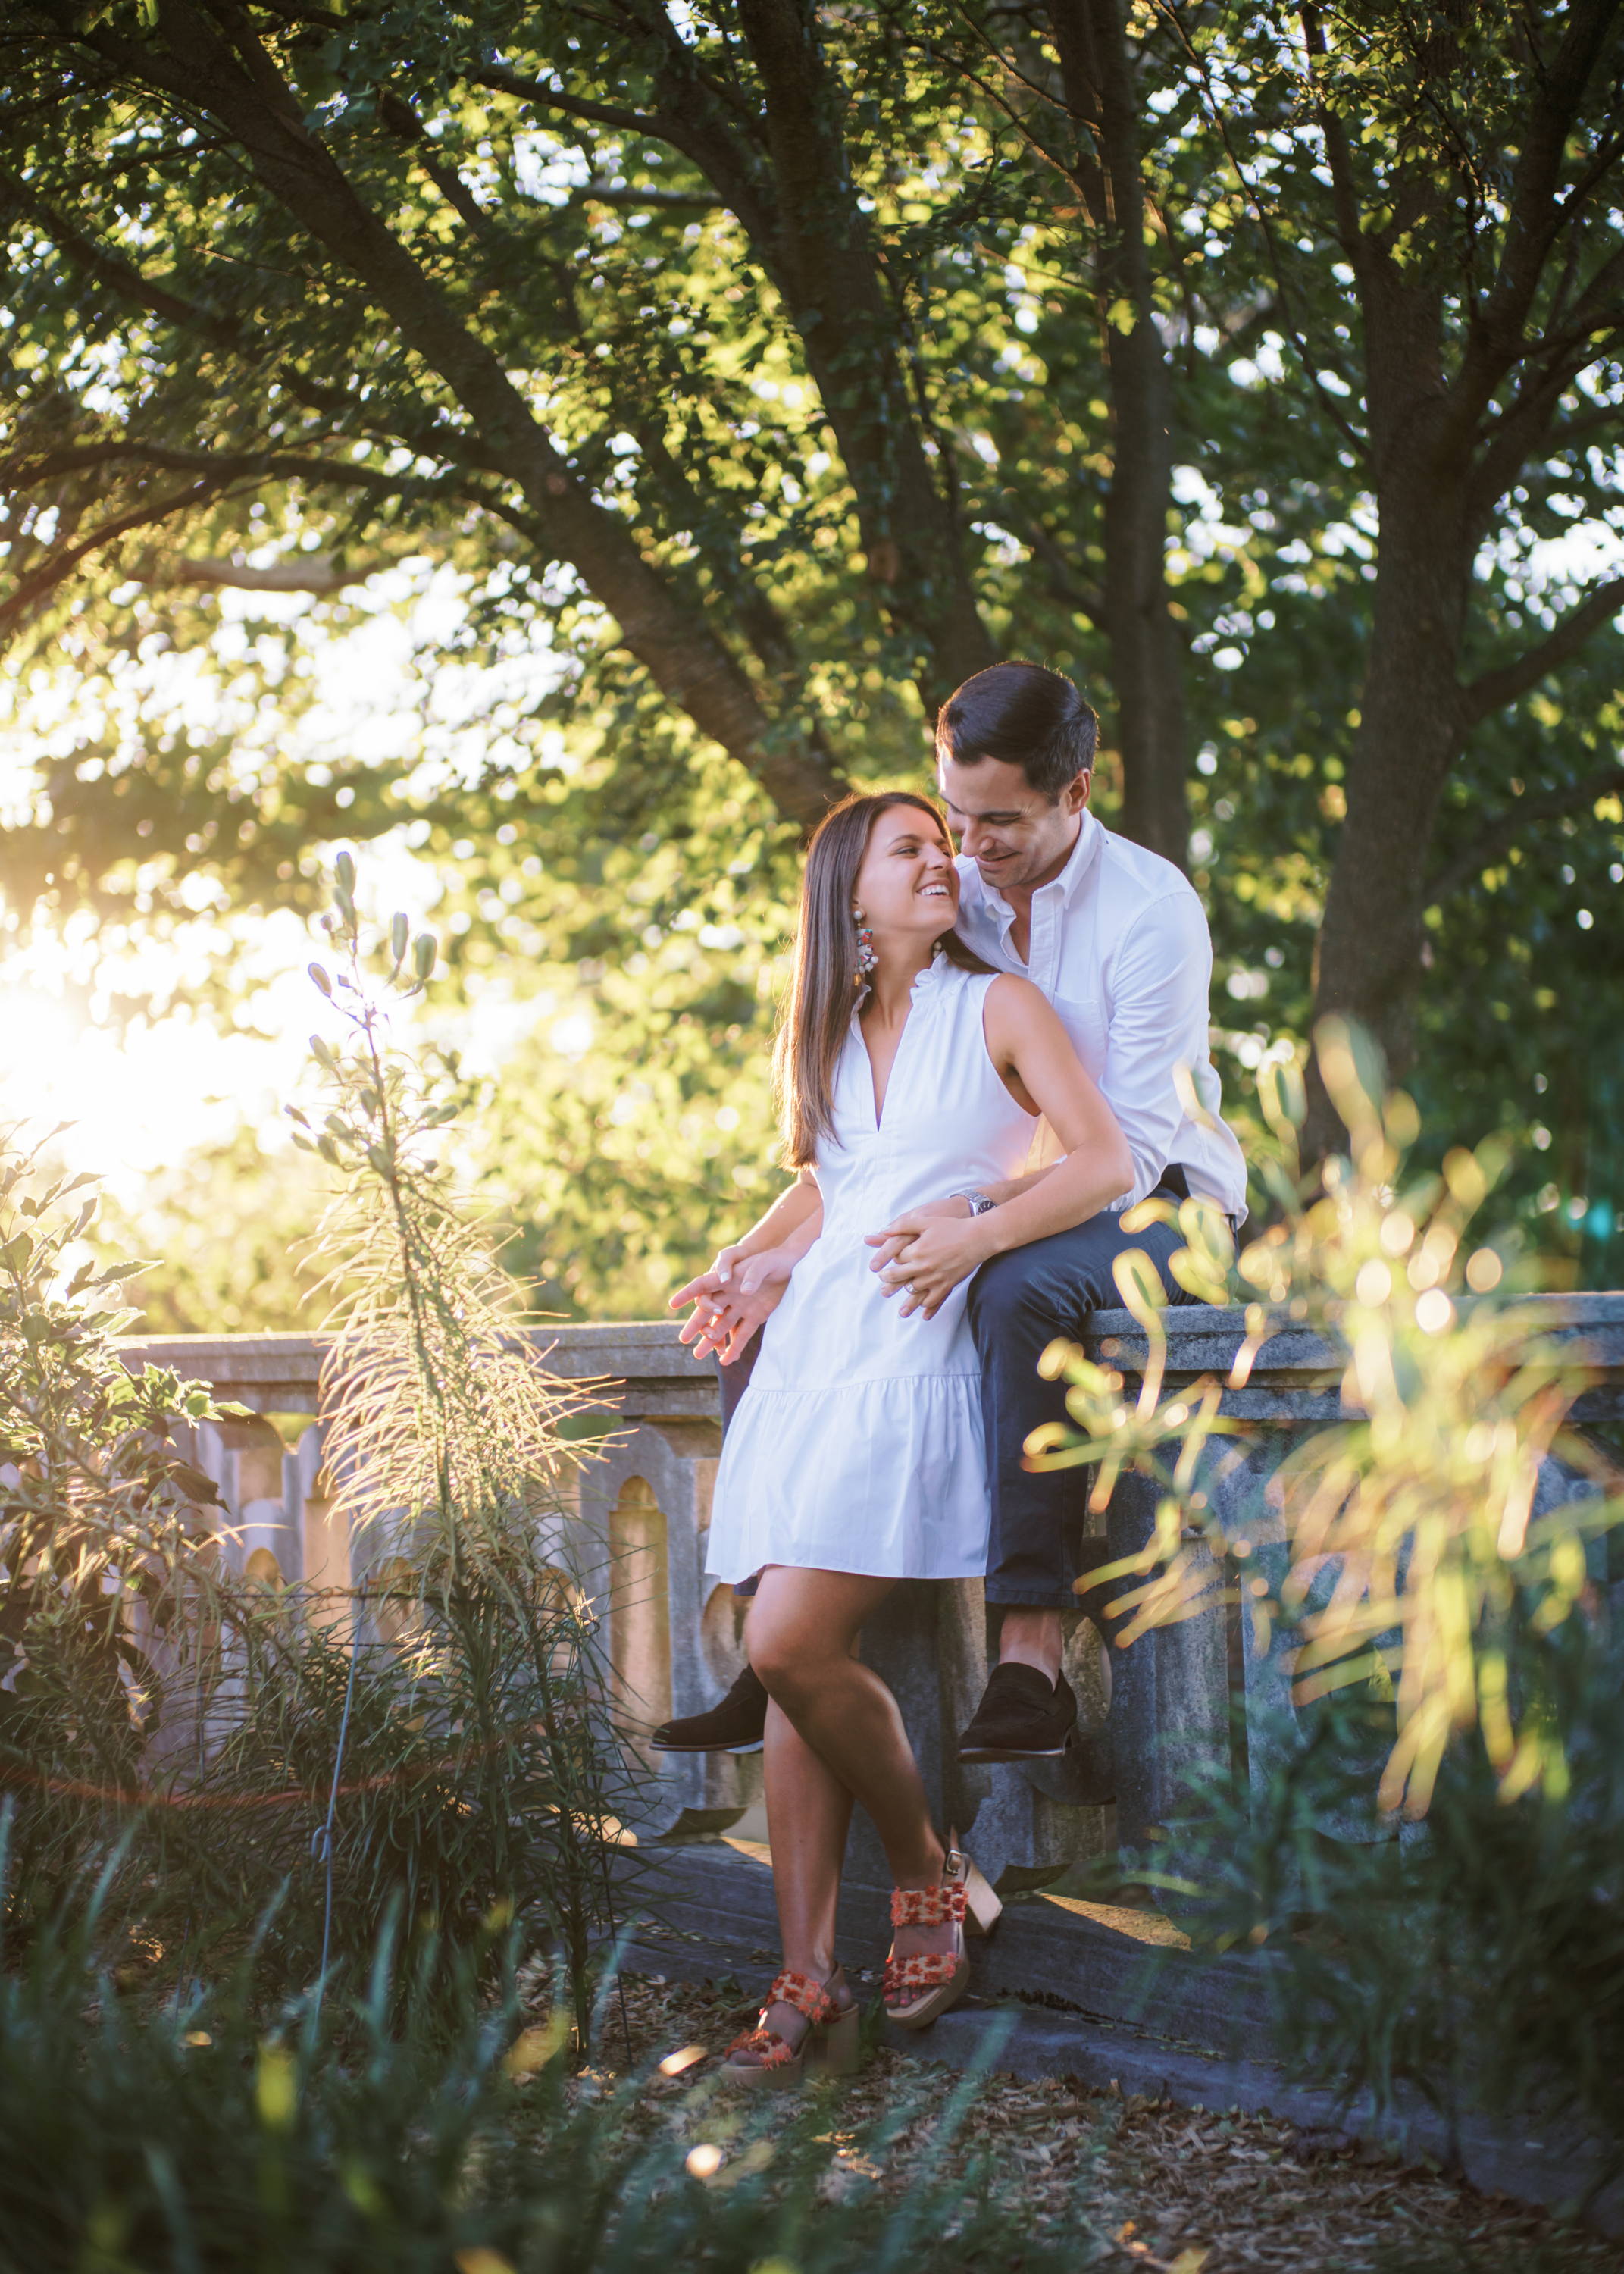 Henne Engagement Ring Couple Andrew & Mollie in the Woods at Sunset